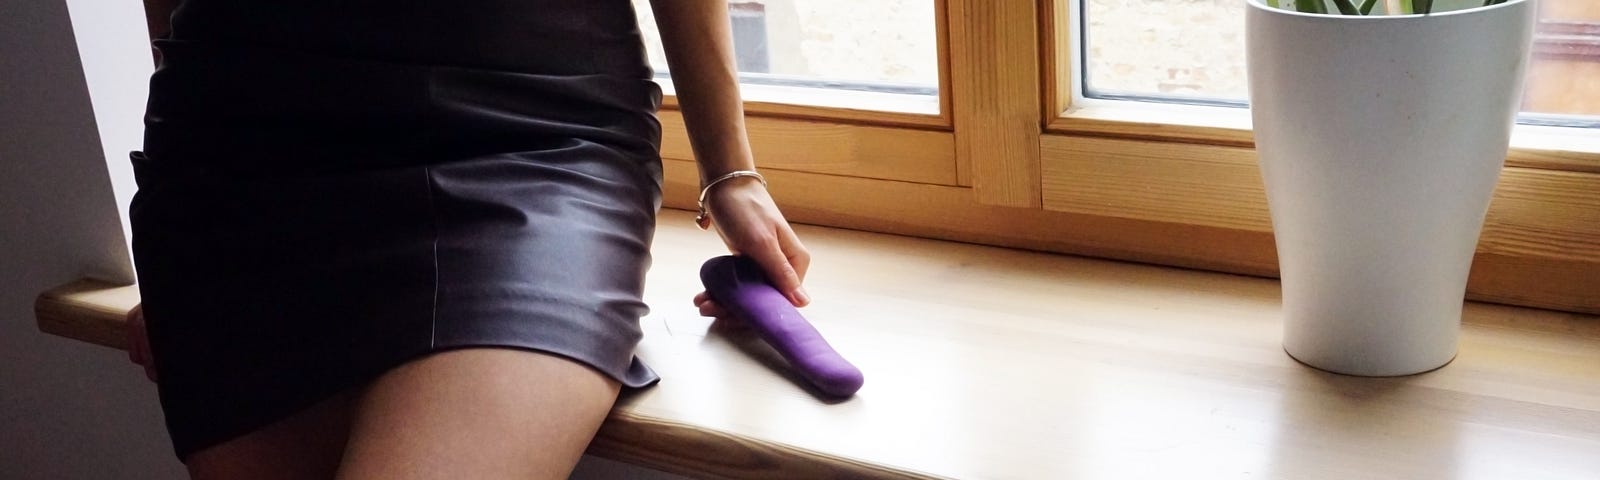 An image of a person in a short skirt, standing with her back to a window, leaning against the window sill and holding what looks like a sex toy in her hand.